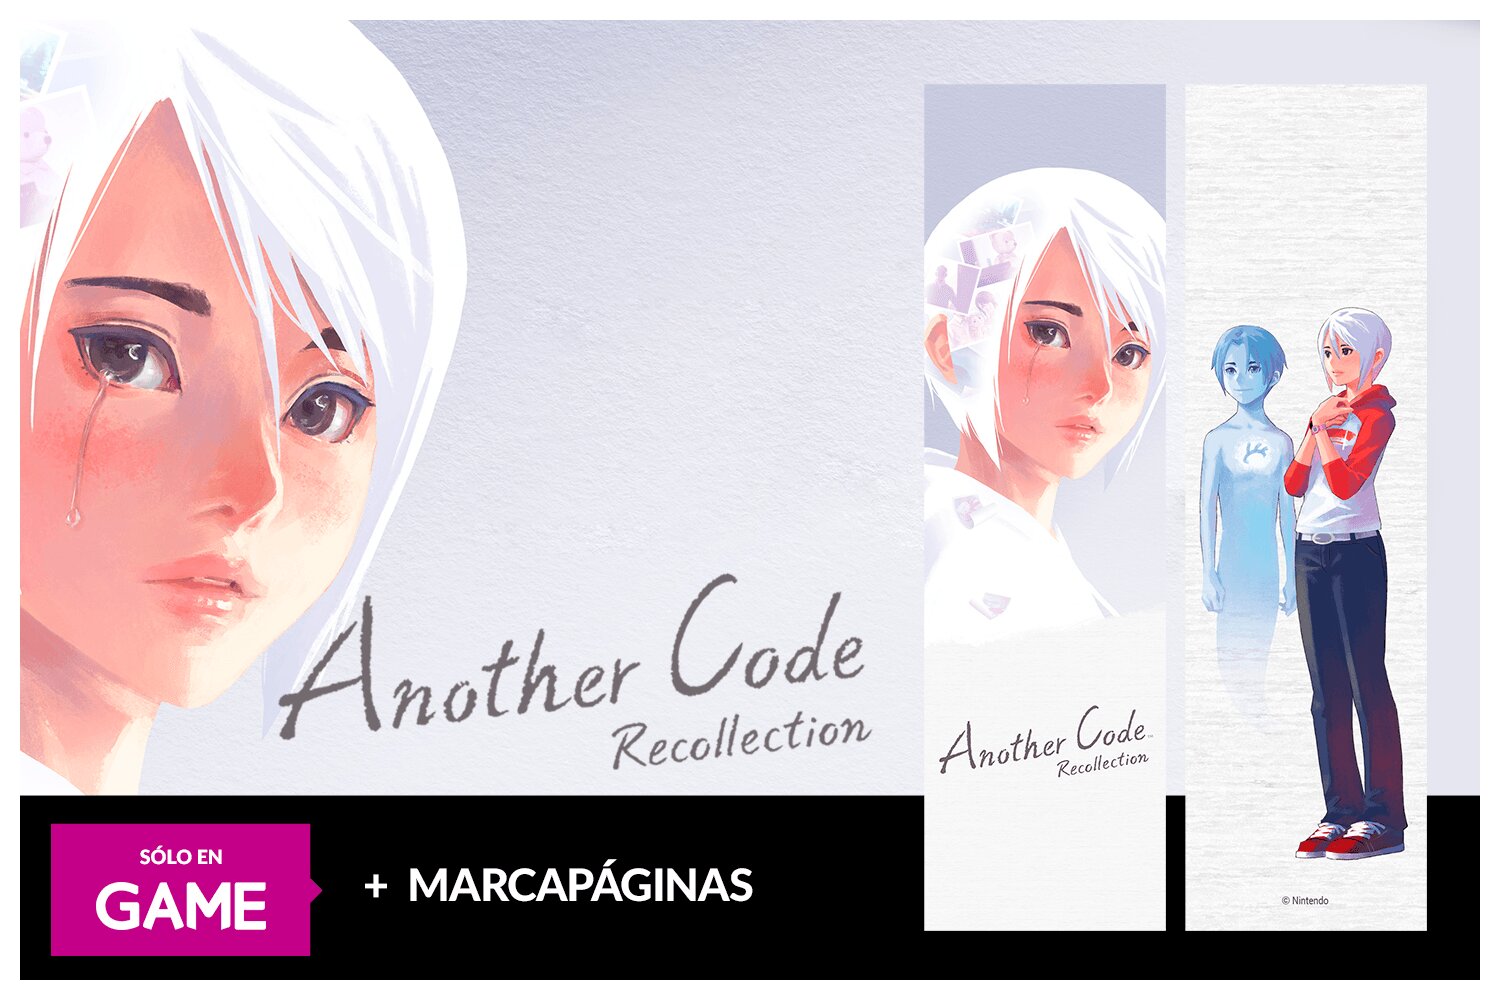 Another Code: Recollection reservar, Another Code: Recollection game, Another Code: Recollection marcapáginas